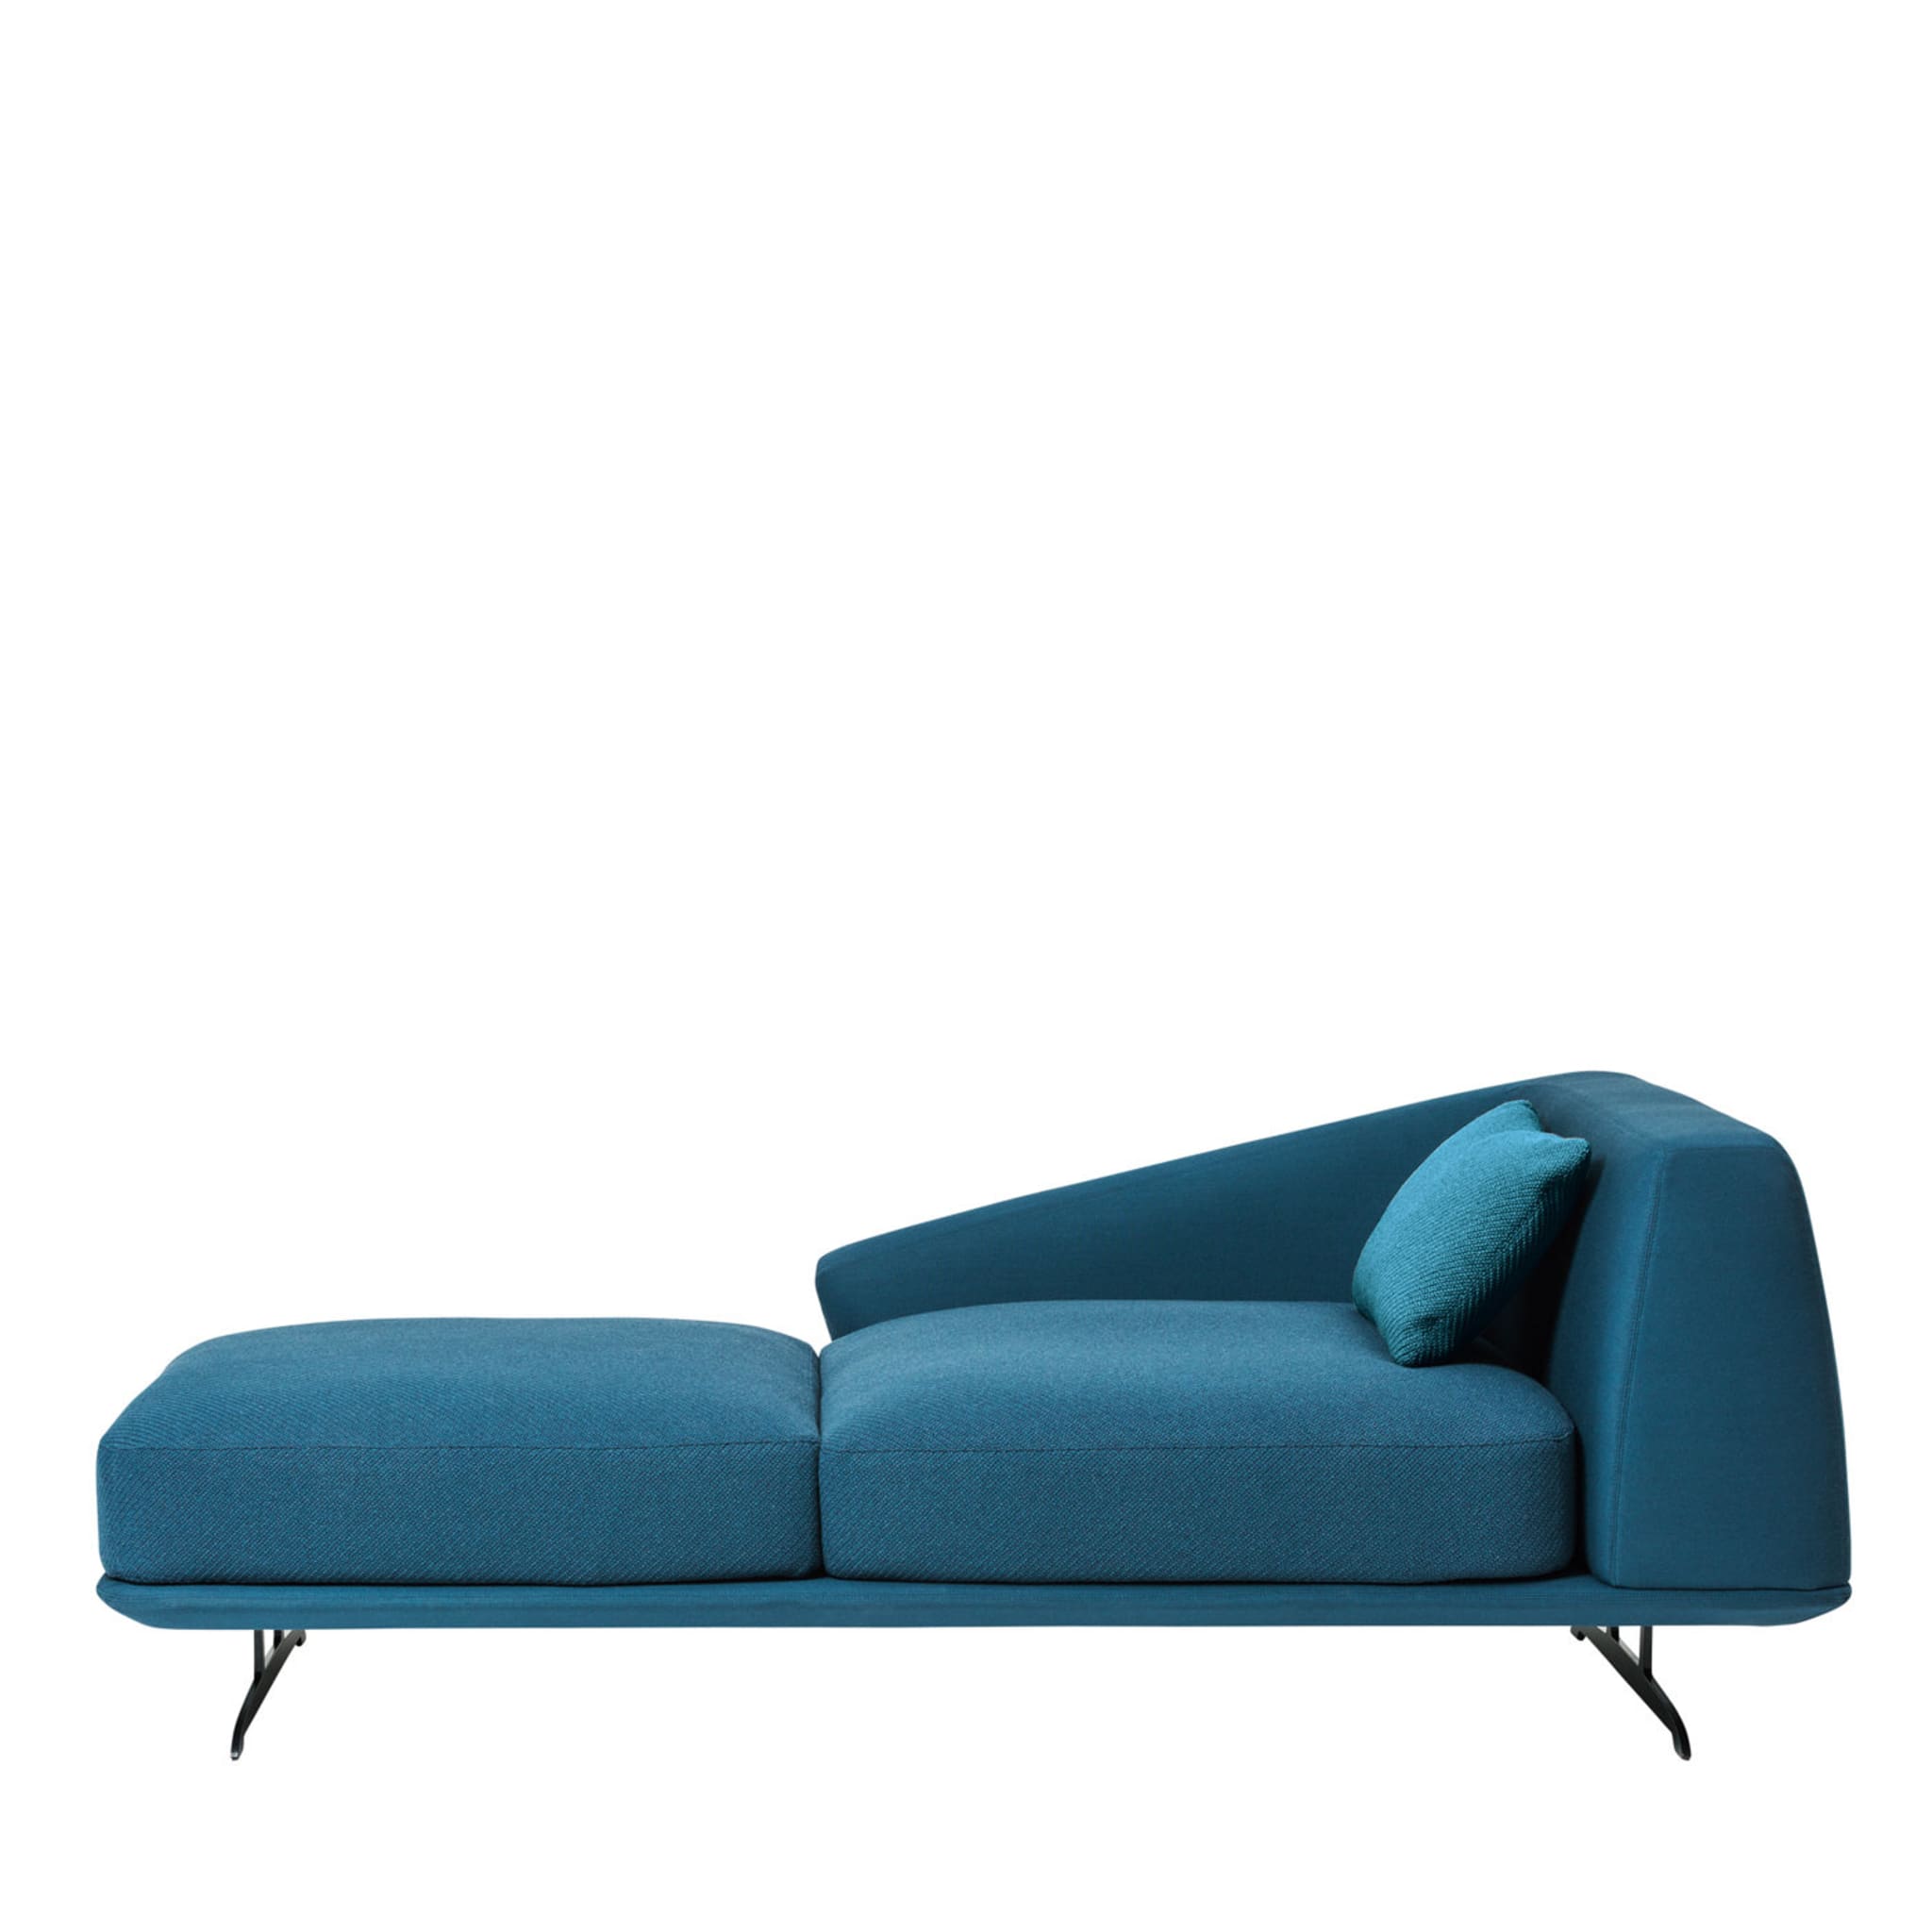 Trays Blue Daybed by Parisotto+Formenton - Main view